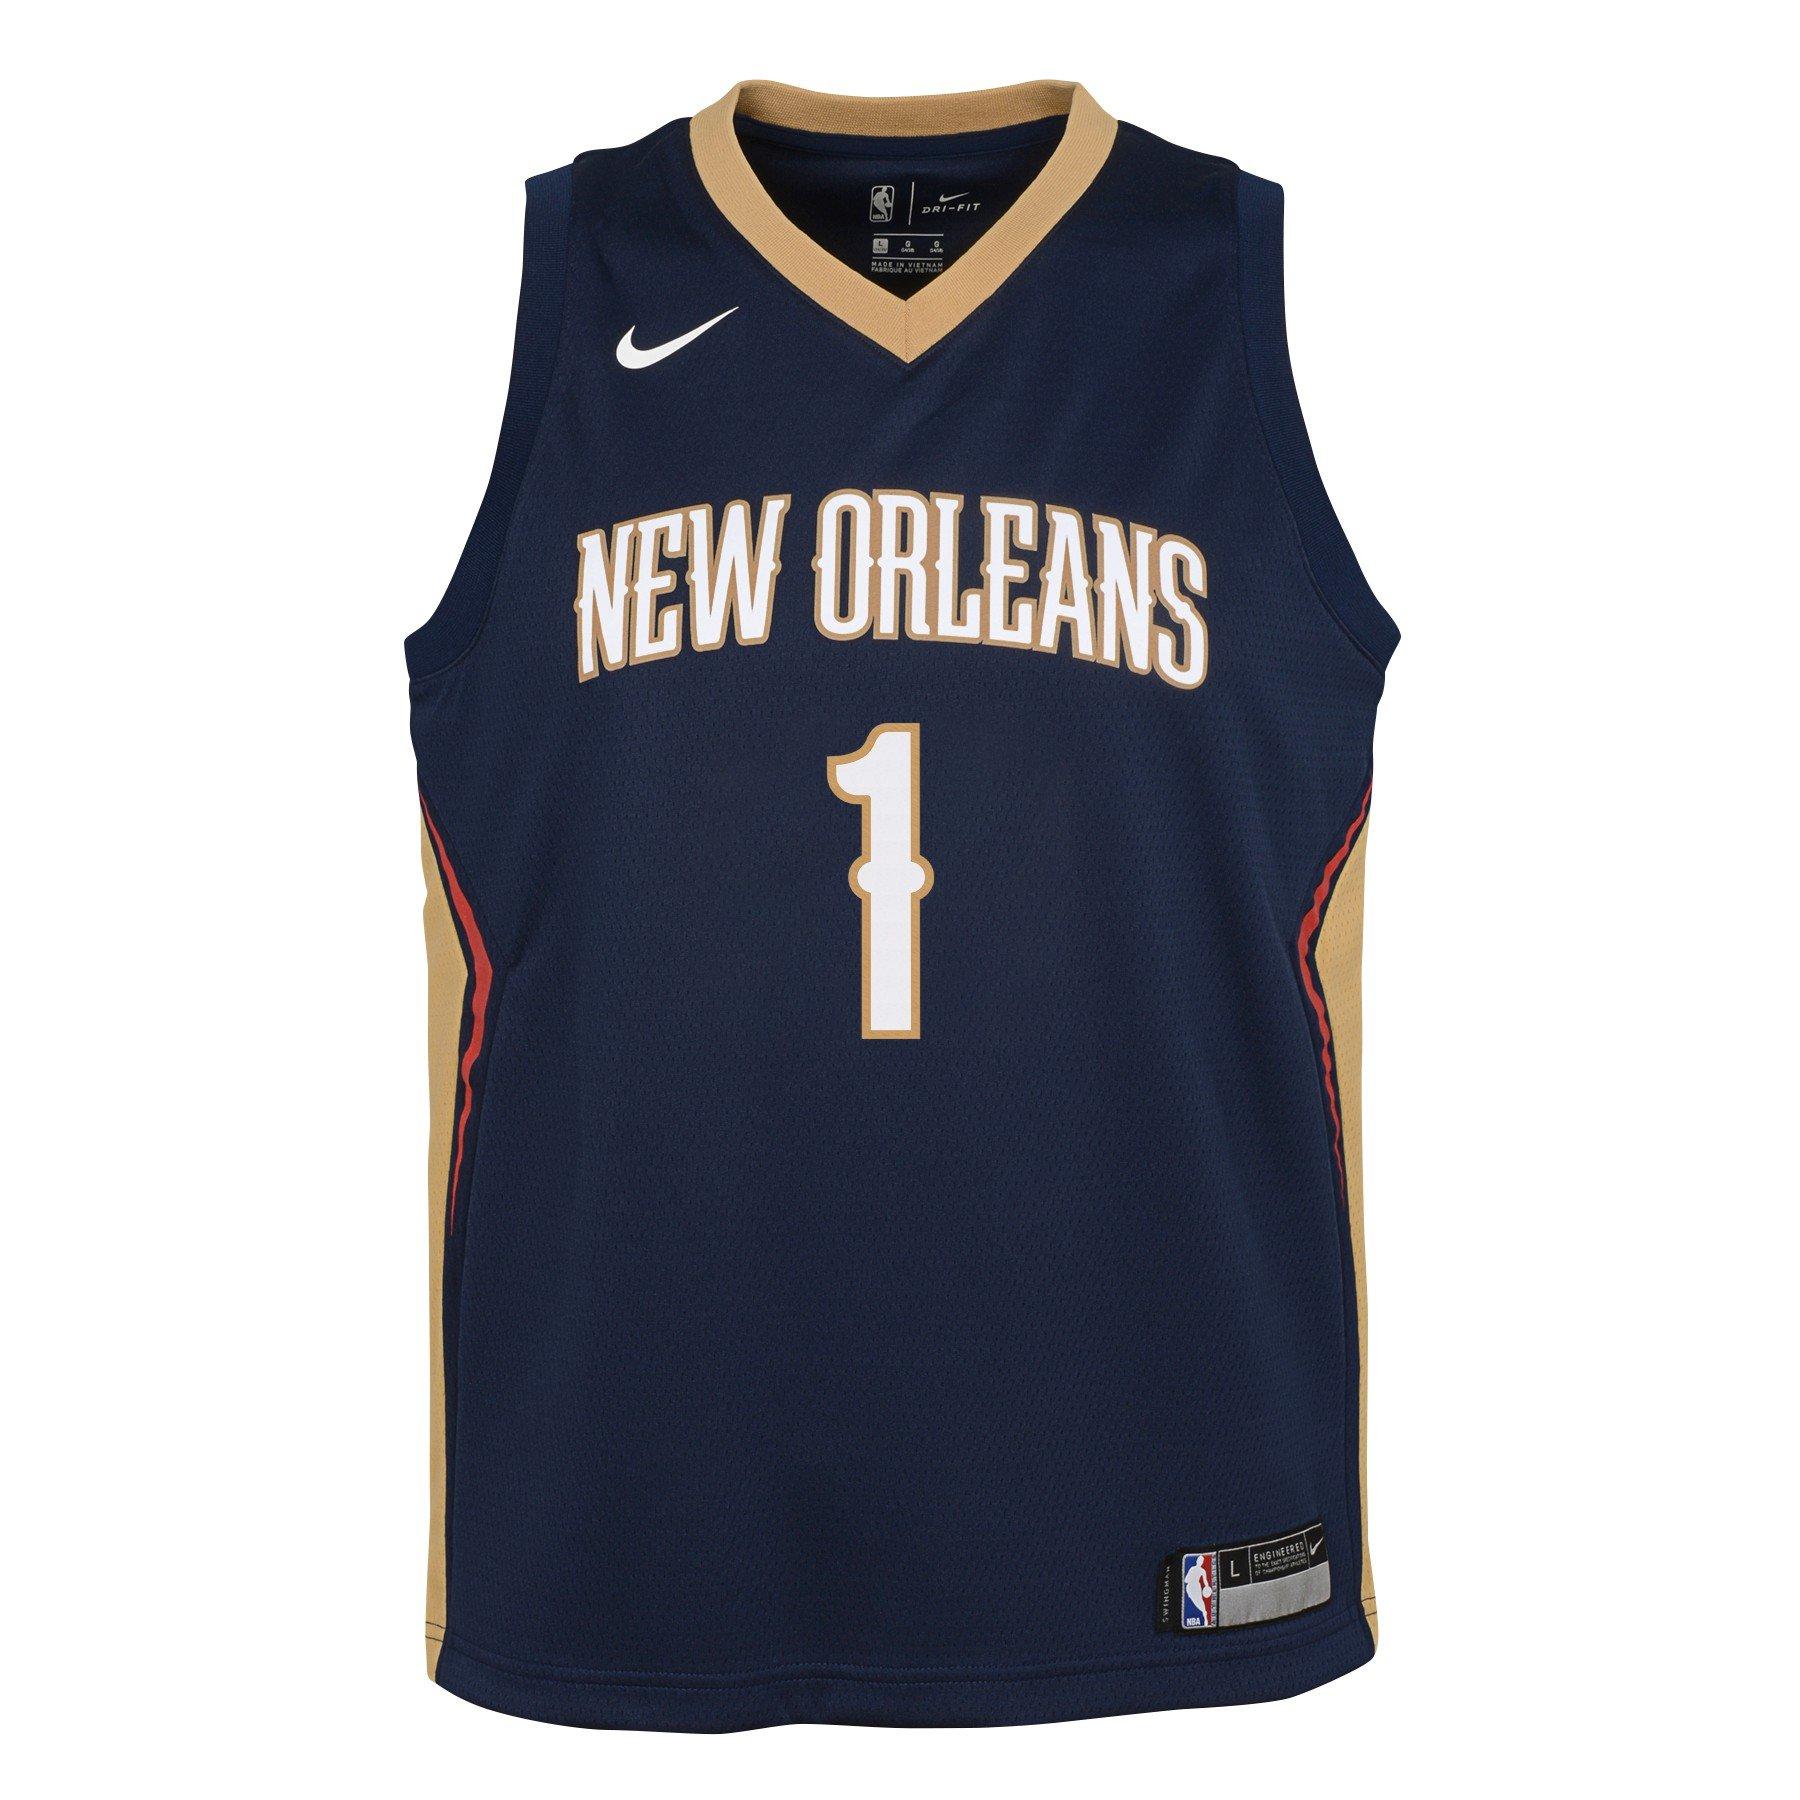 pelicans youth jersey